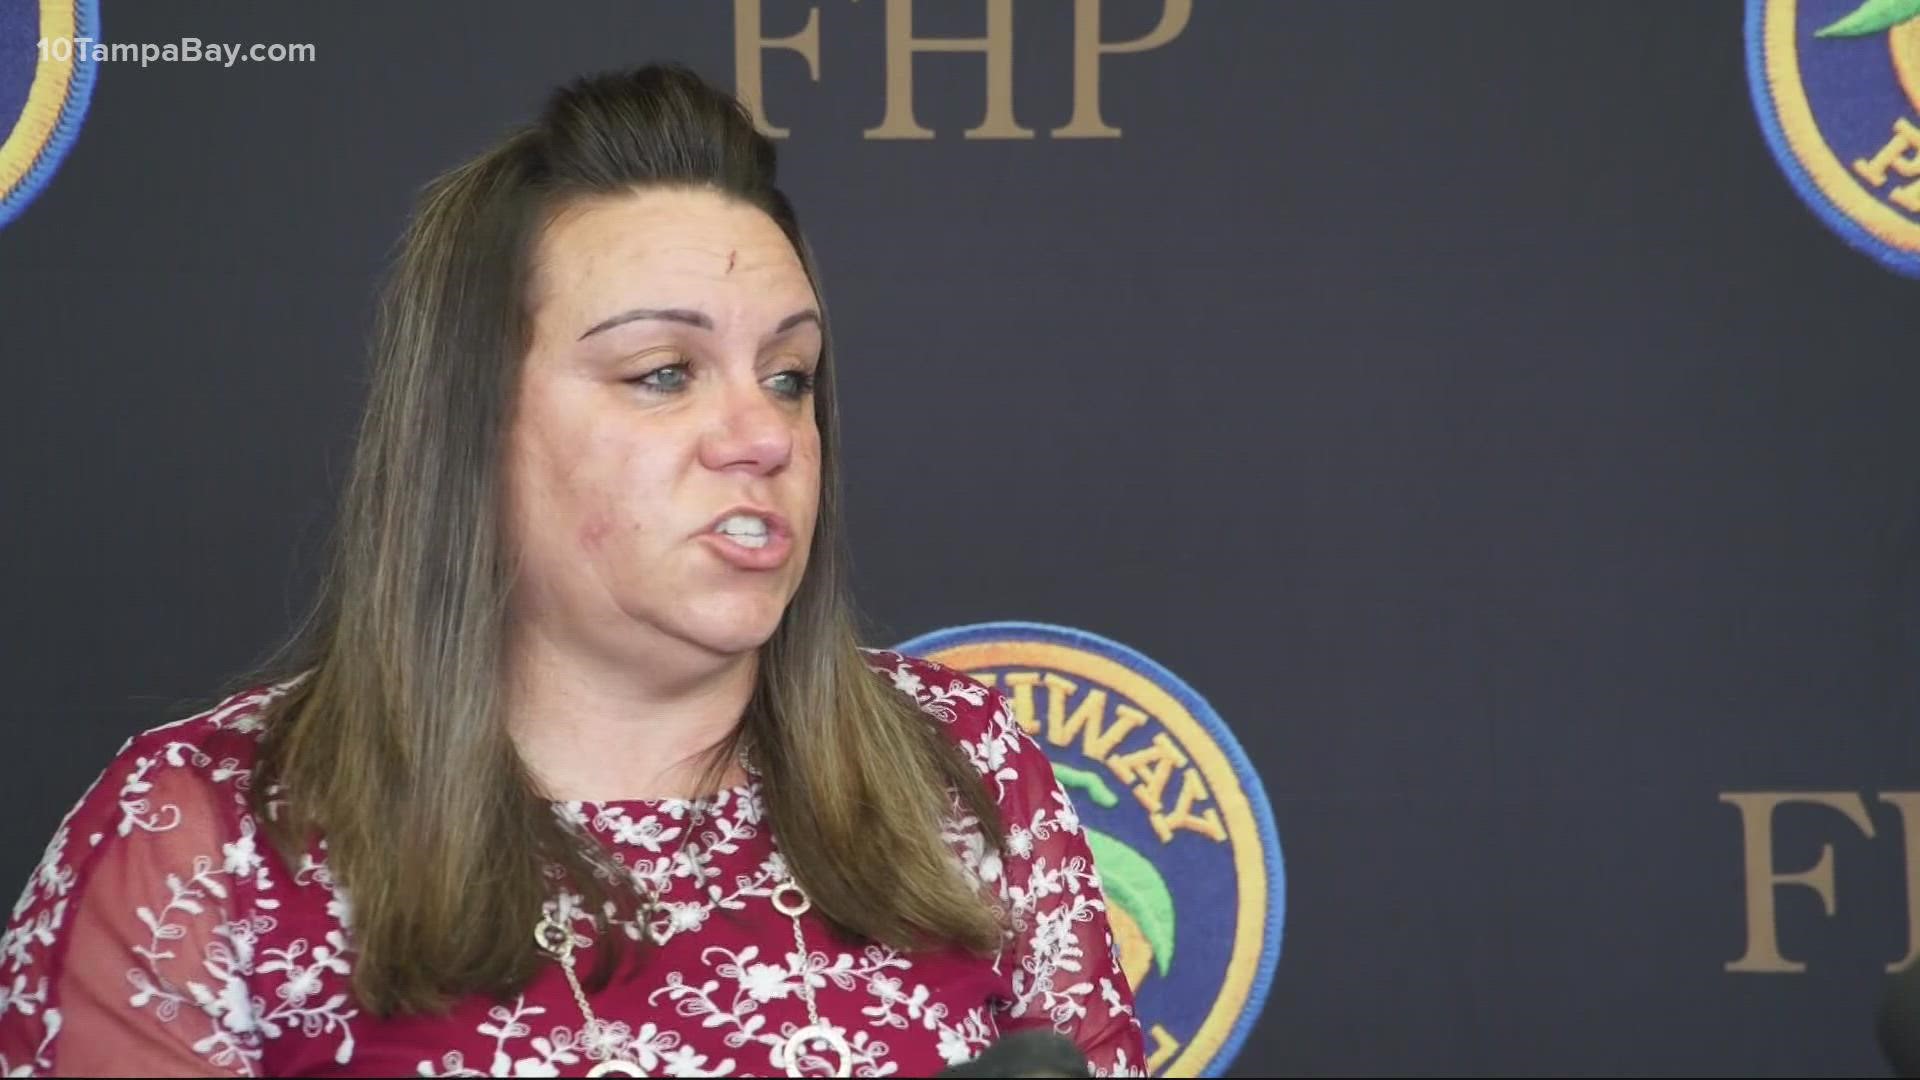 Master Trooper Toni Schuck broke down in tears as she recalled crashing into the suspected drunk driver's car to protect everyone at the event.